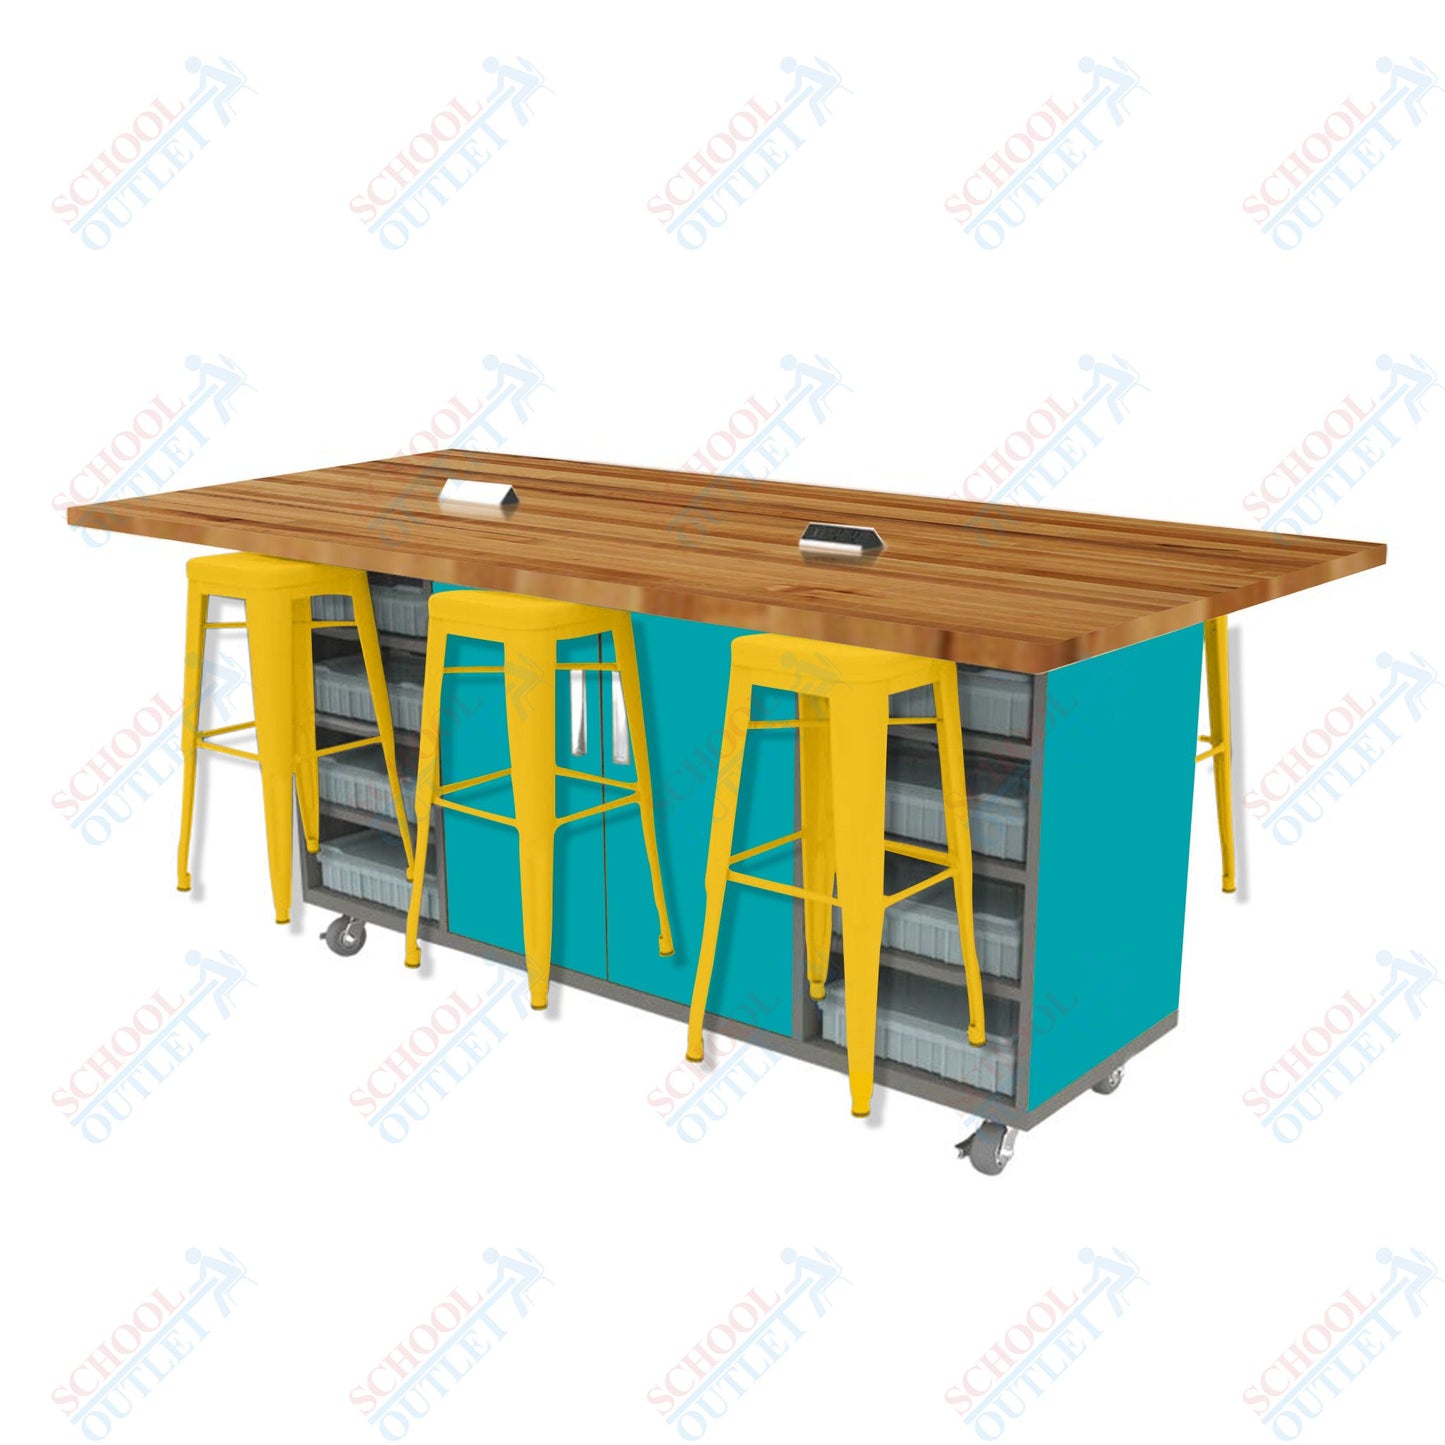 CEF ED Double Table 42"H Butcher Block Top, Laminate Base with  6 Stools, Storage bins, and Electrical Outlets Included.